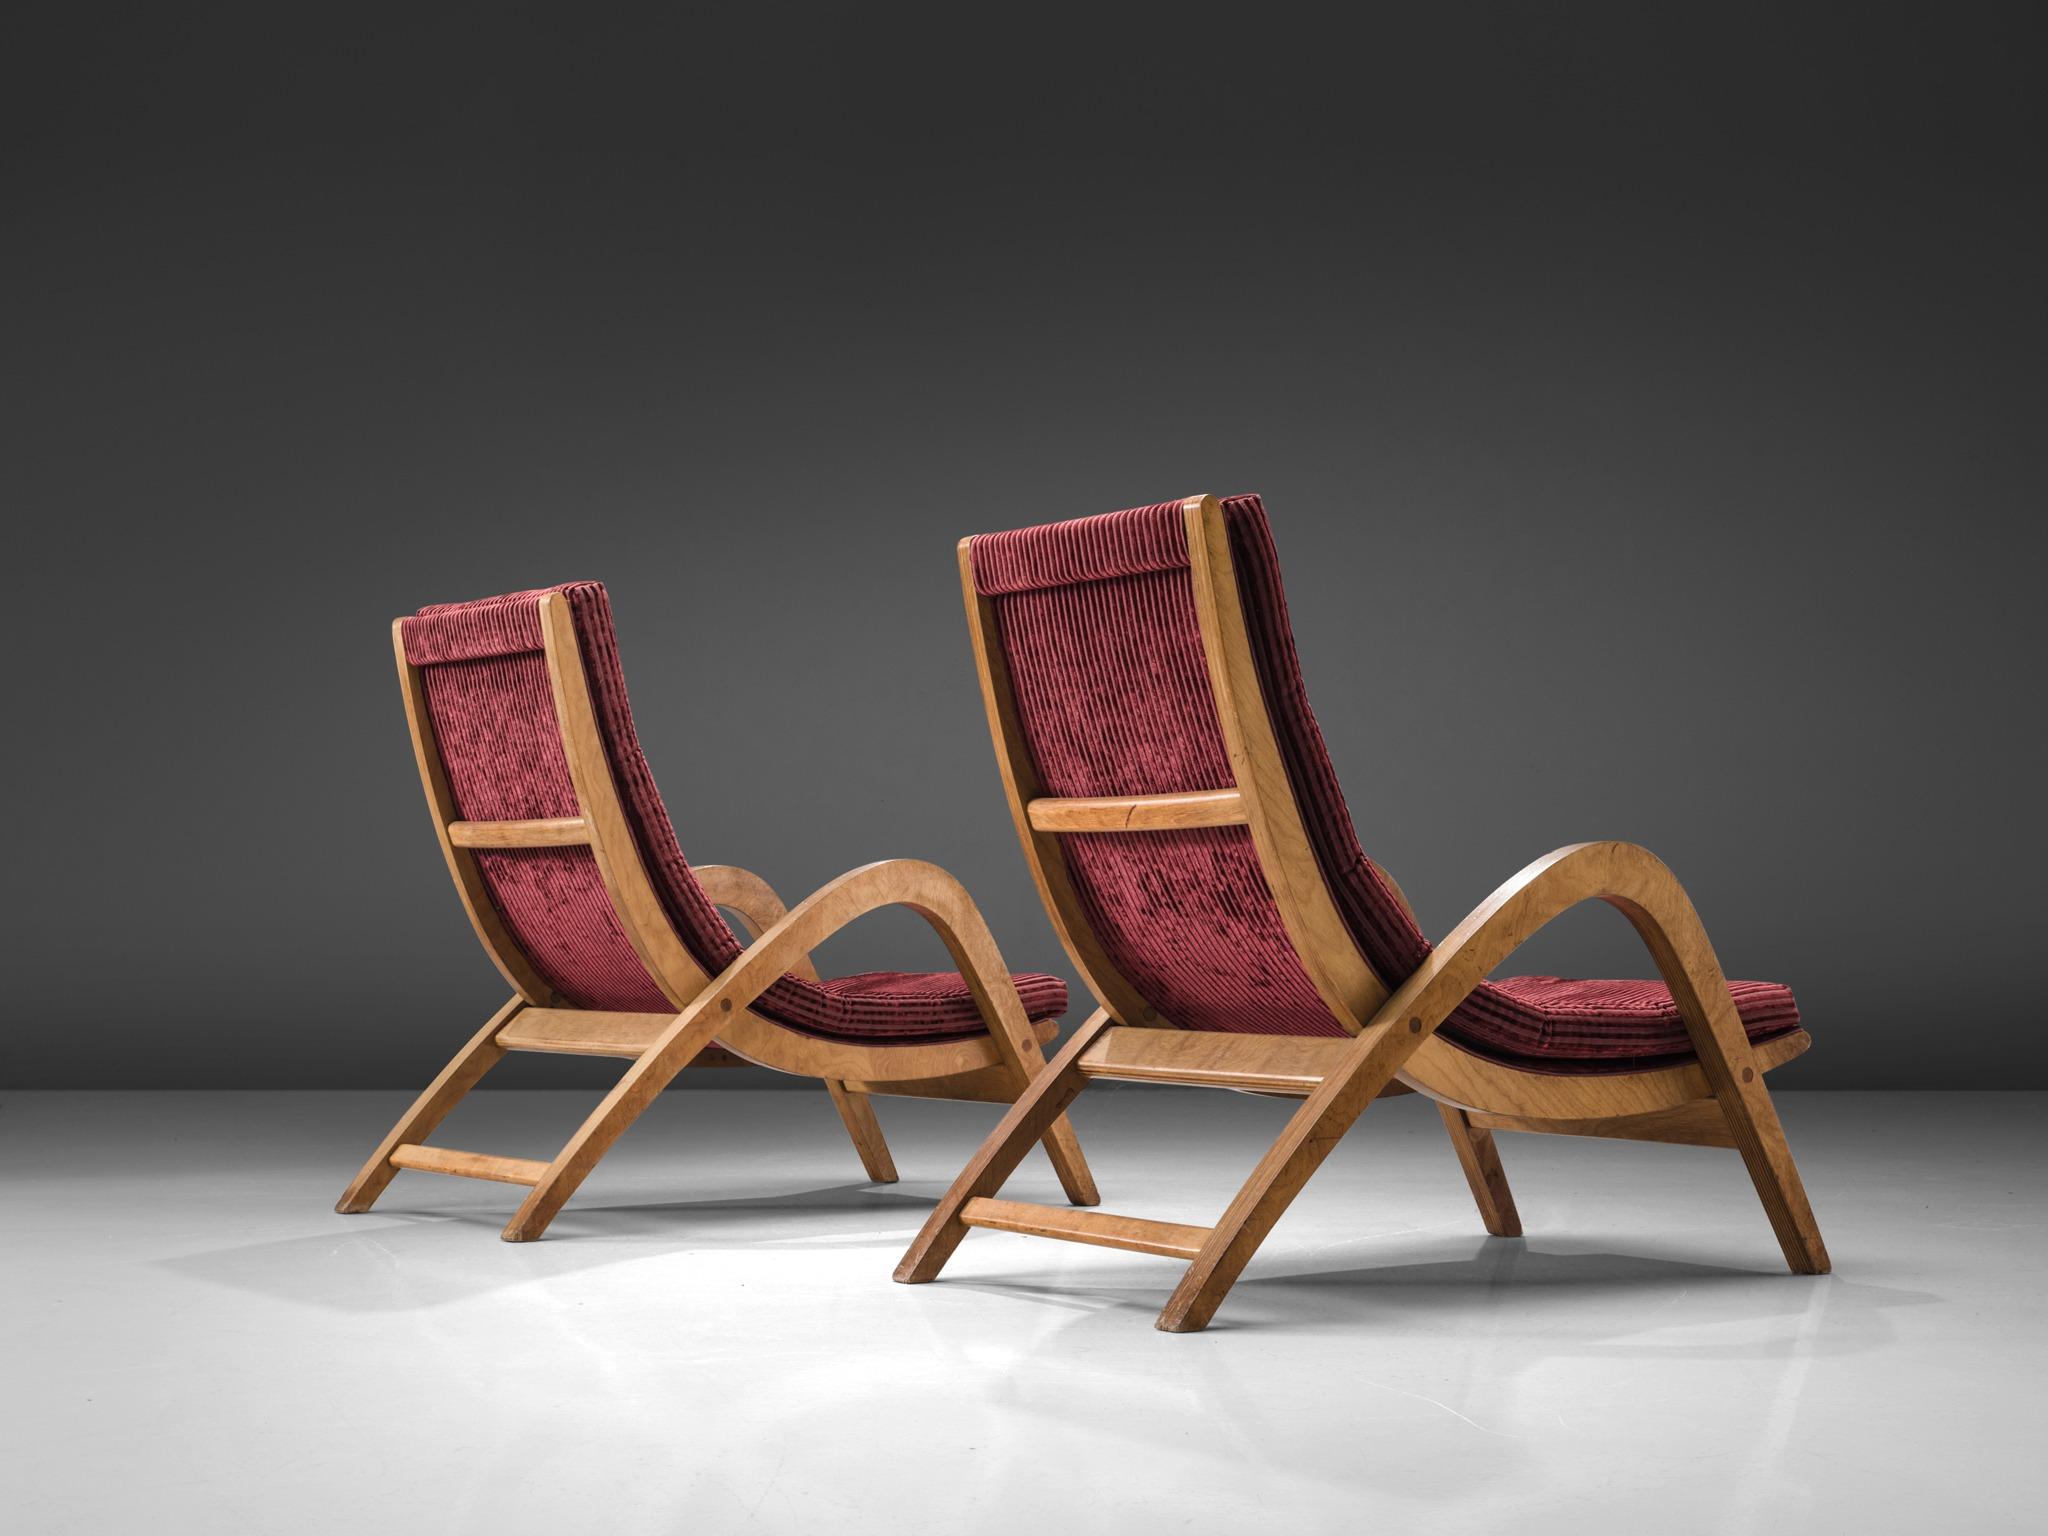 Scottish Very Rare and Very Large Lounge Chairs by Neil Morris for H. Morris, Scotland